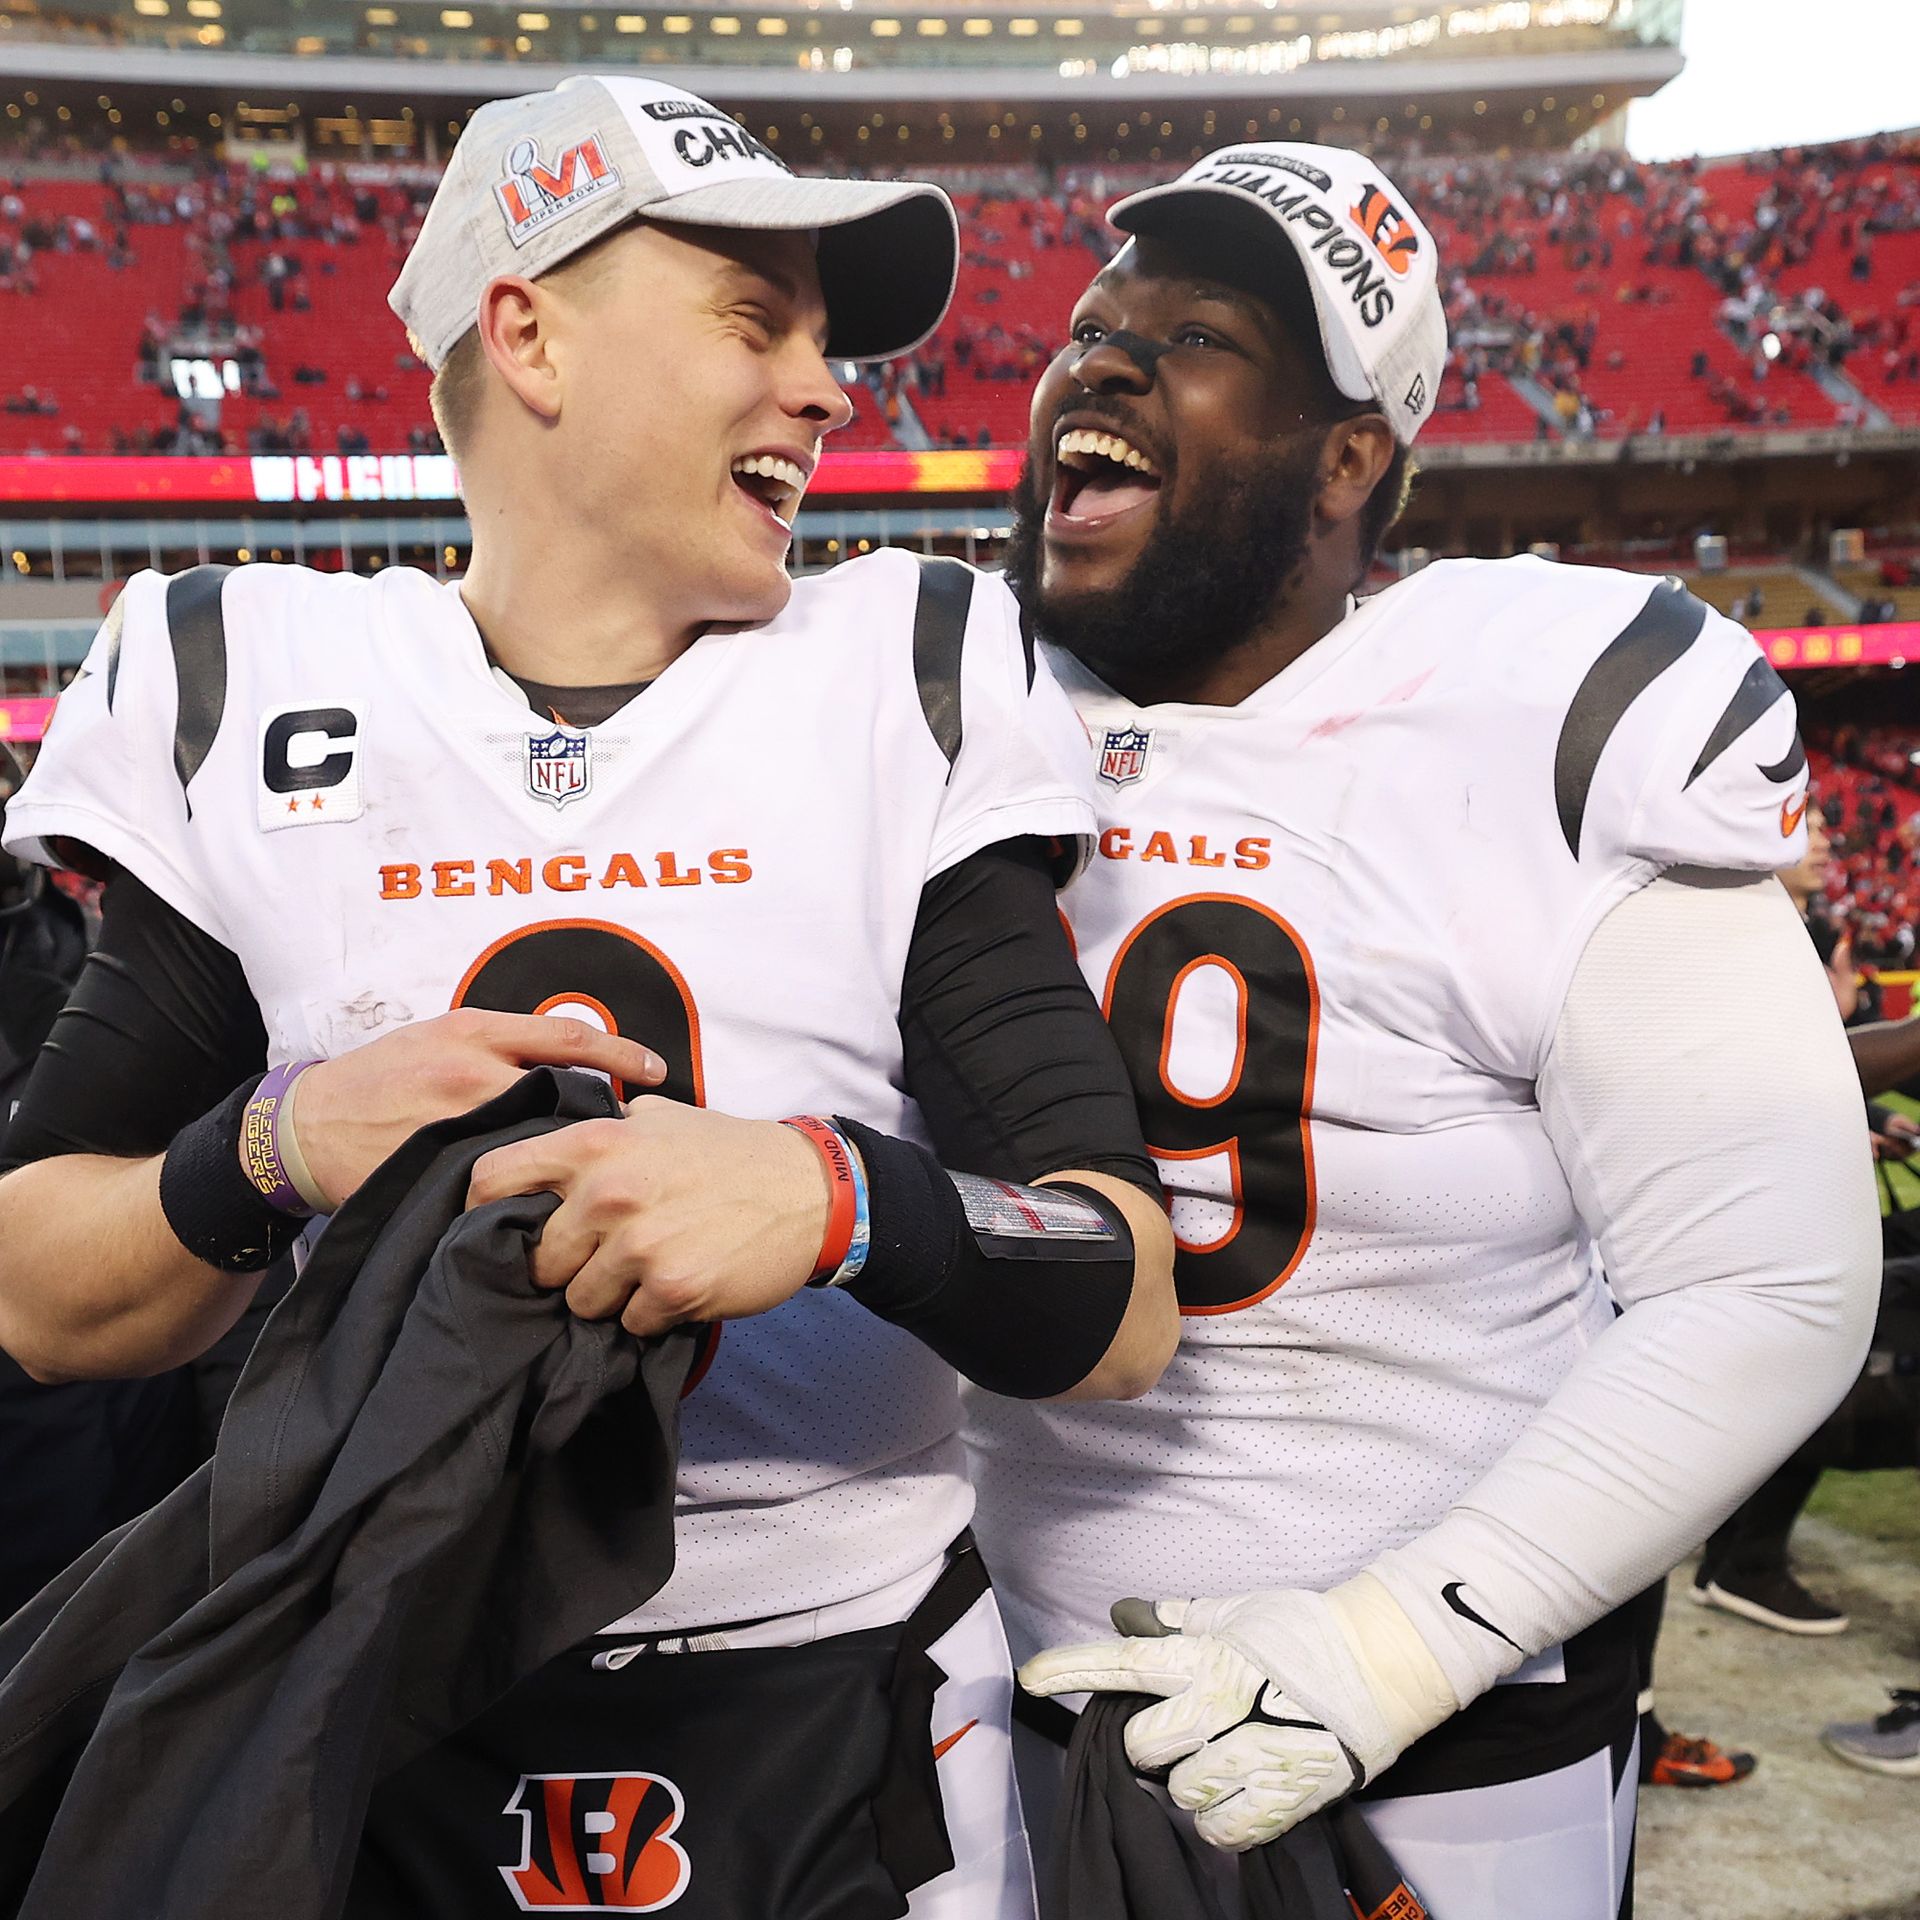 Cincinnati's local ratings for Bengals' playoff win outdraws Super